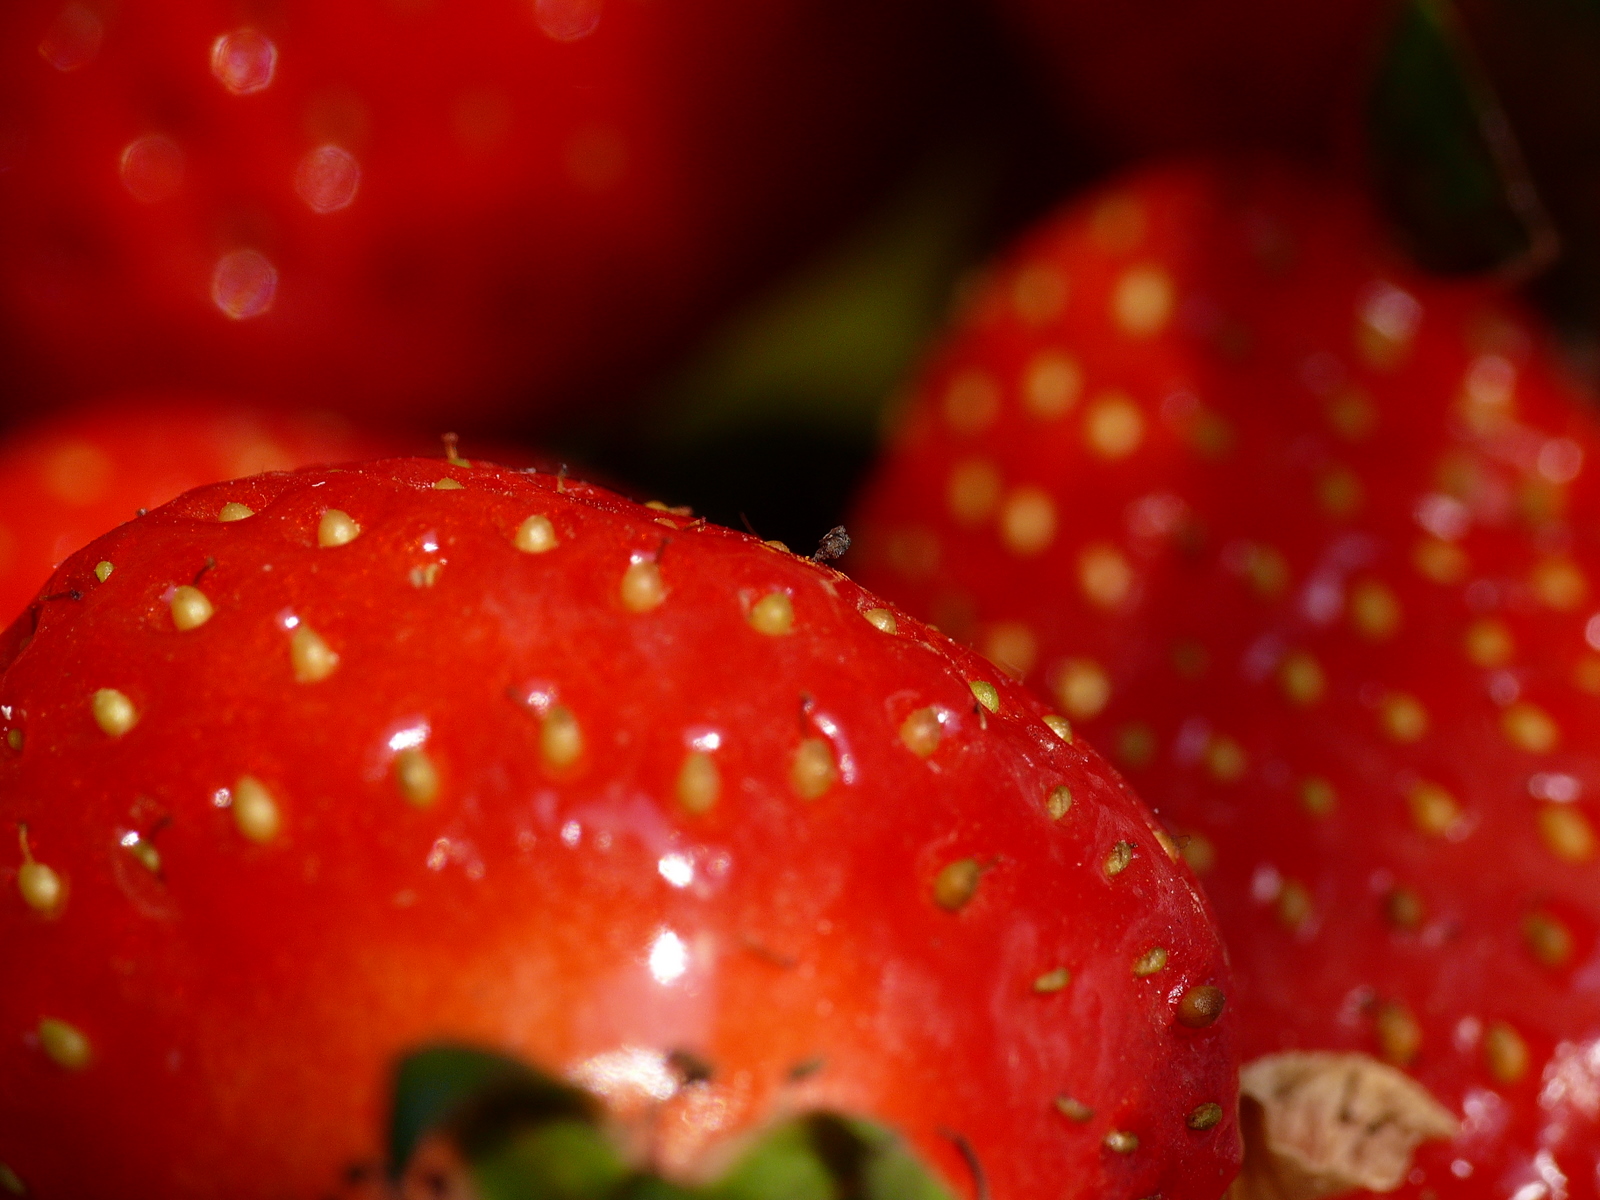 a close up image of the surface of a group of strawberrys